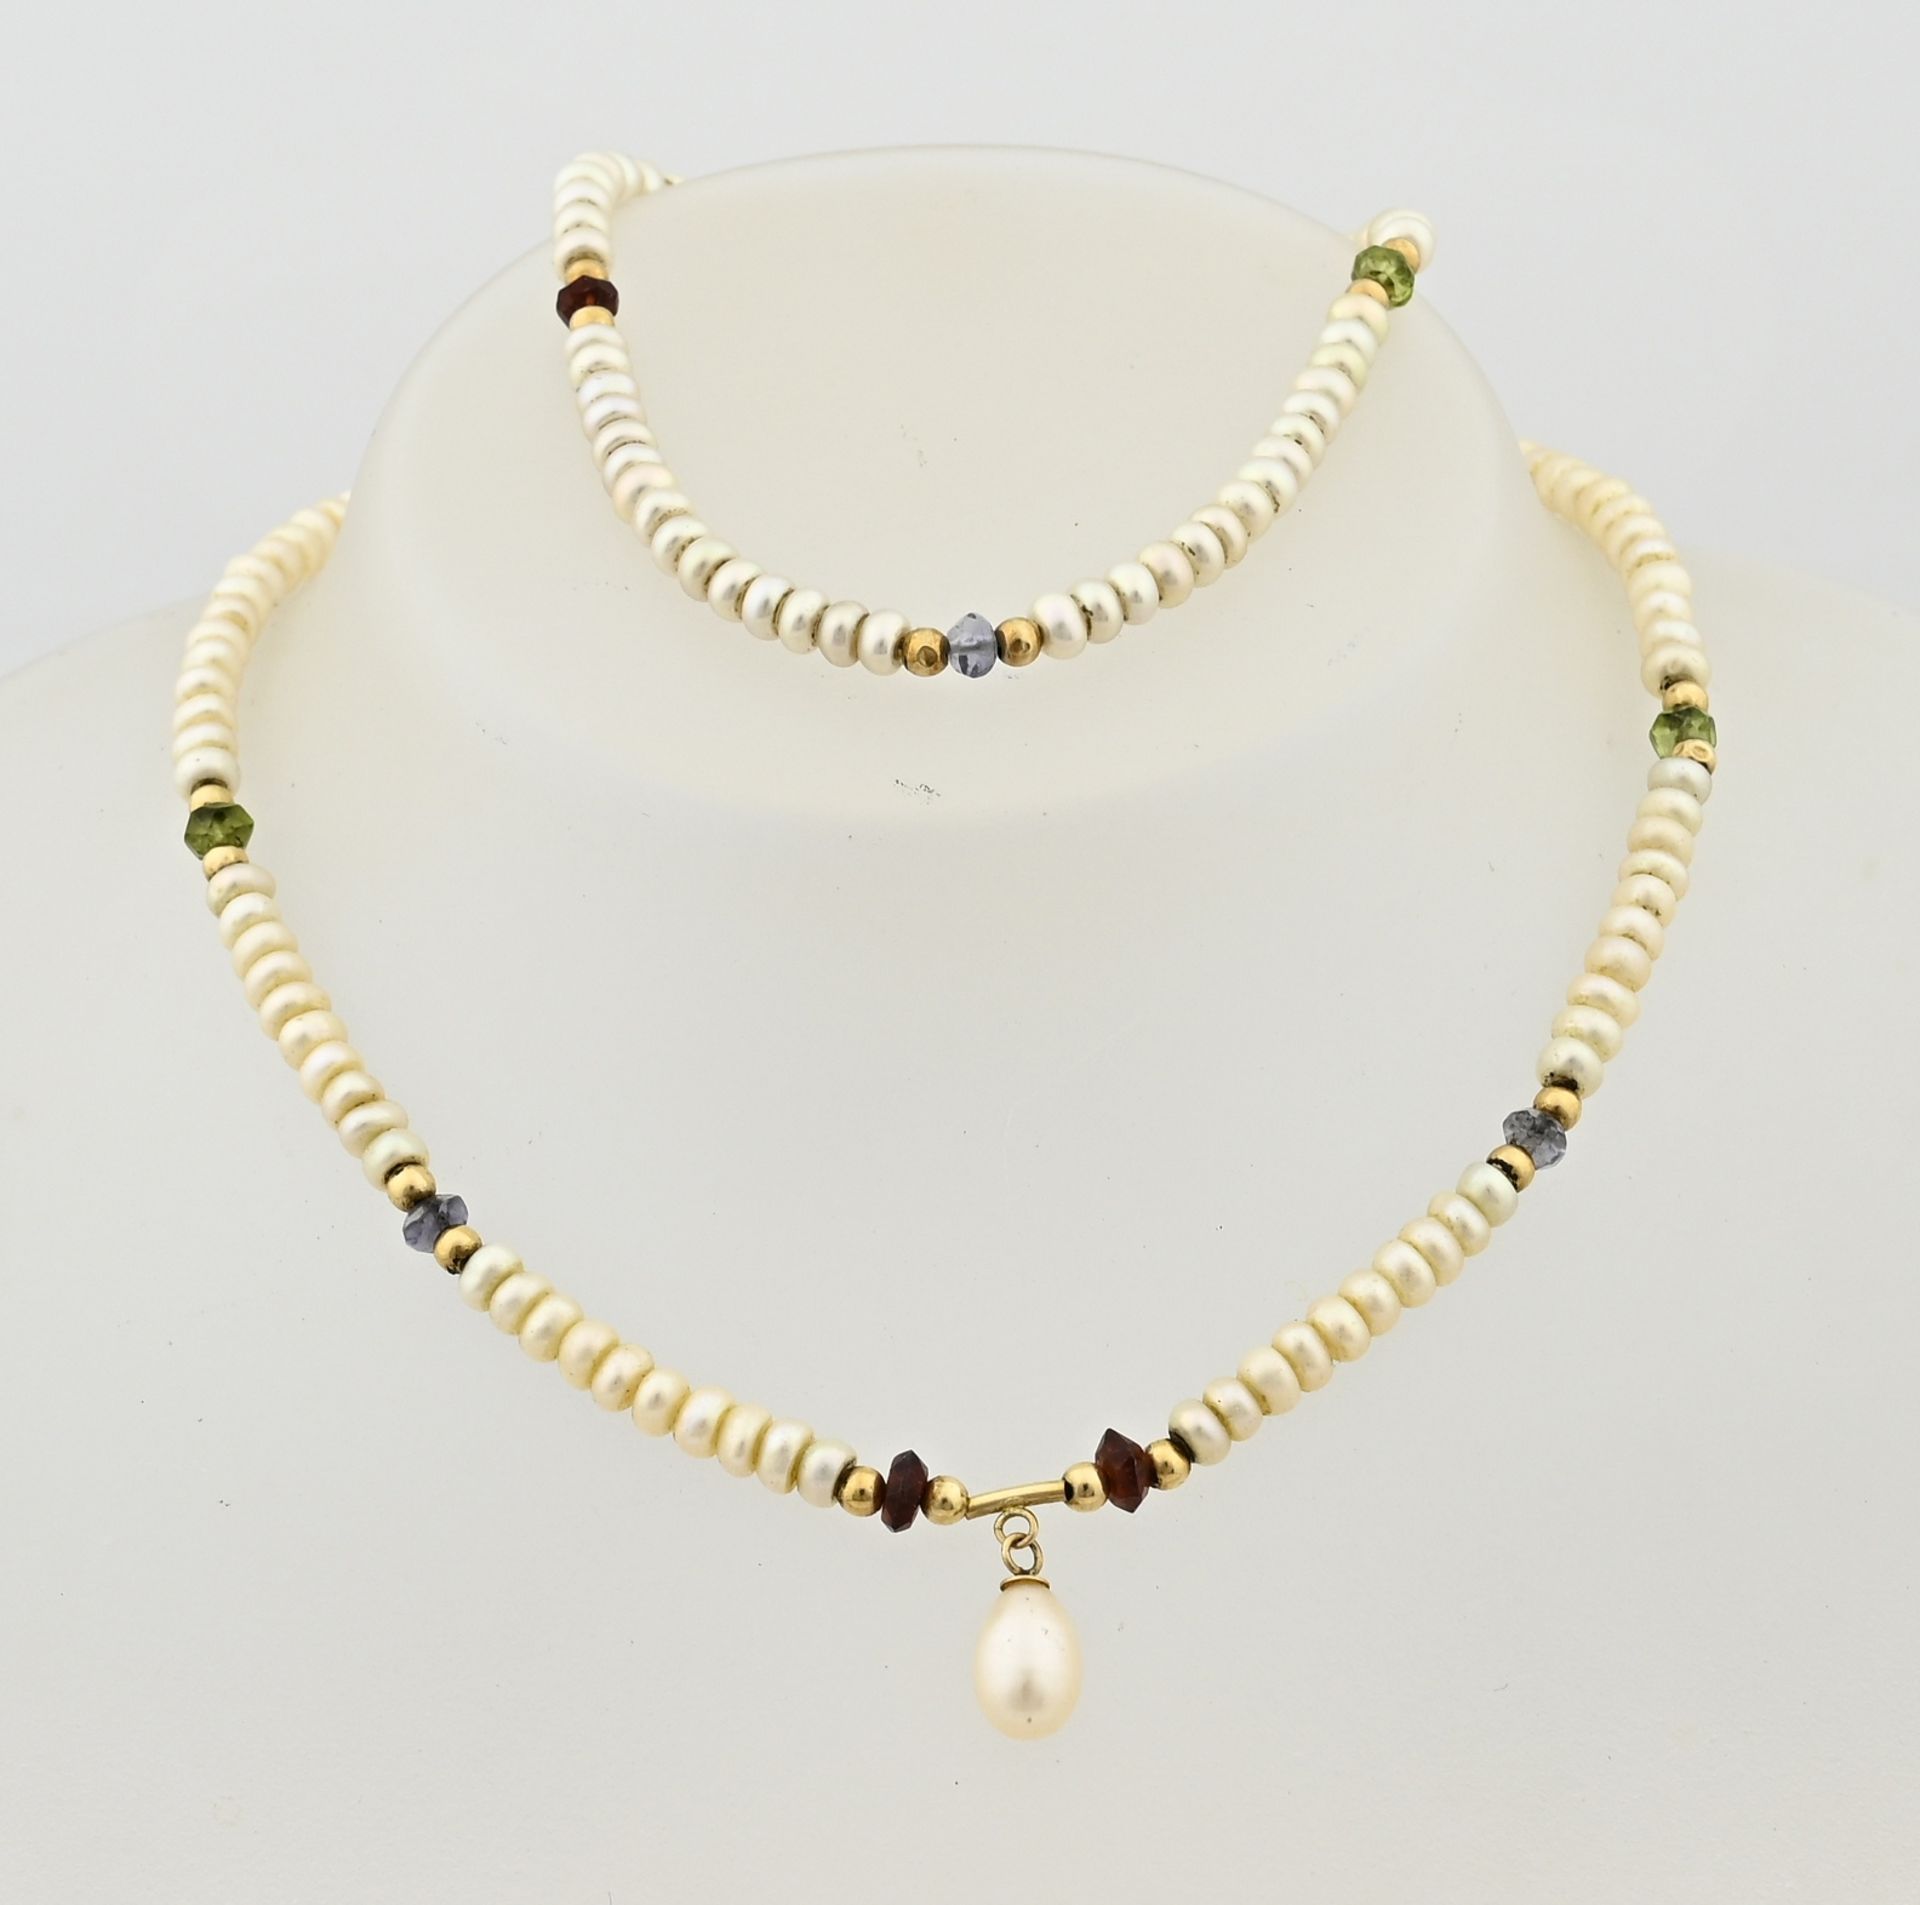 Pearl necklace and bracelet with gold